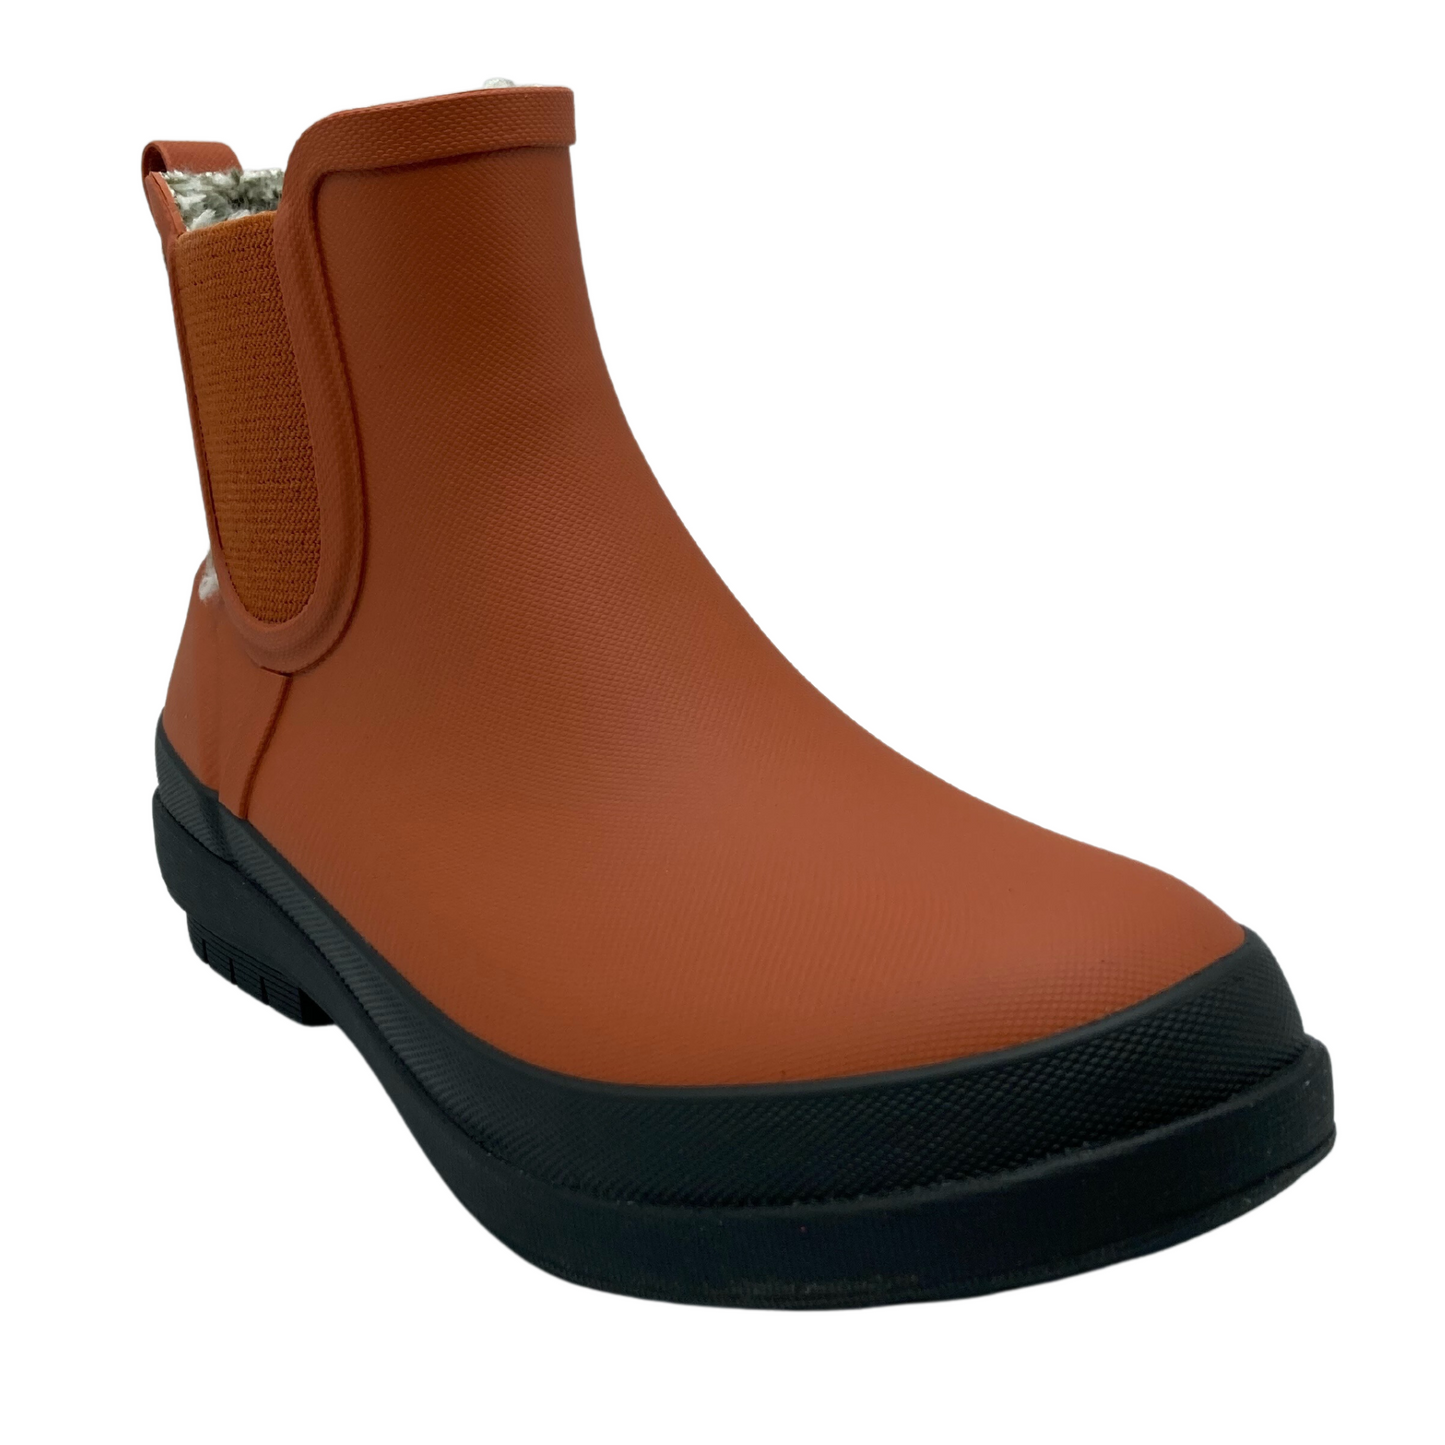 45 degree angled view of burnt orange short rain boot with black rubber outsole